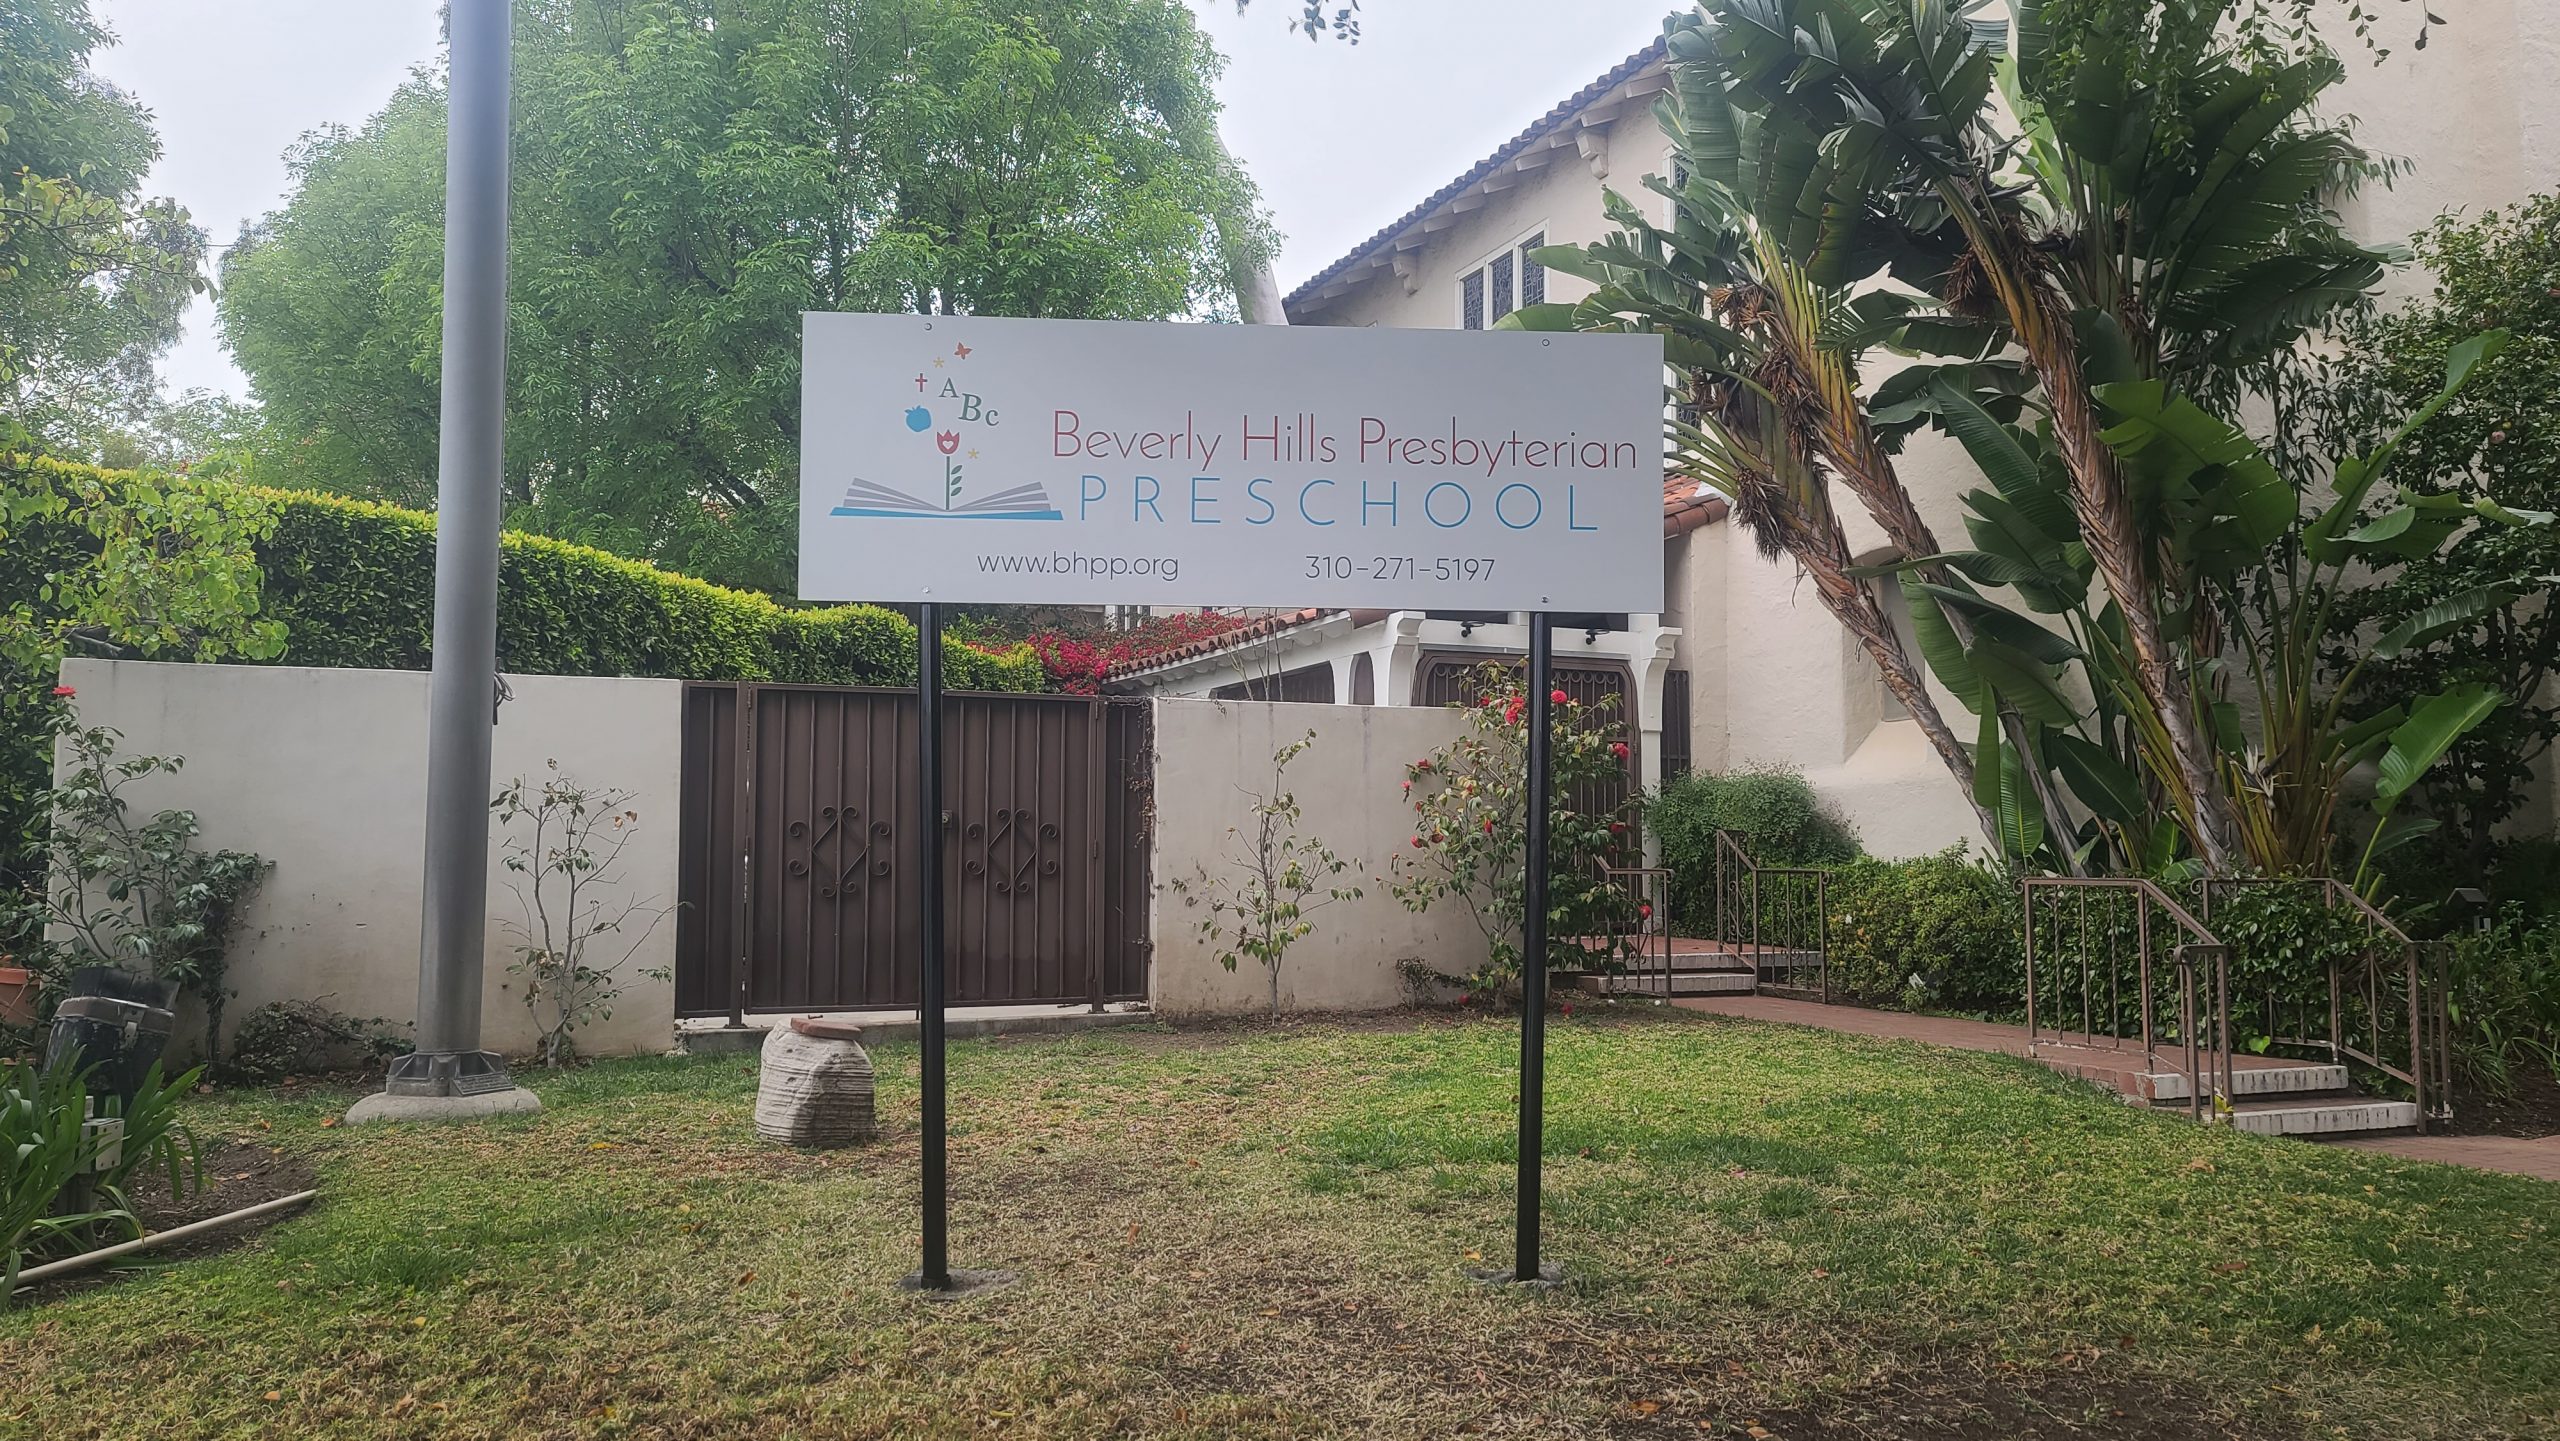 The post and panel school sign we fabricated and installed for for Beverly Hills Presbyterian Preschool in Beverly Hills.